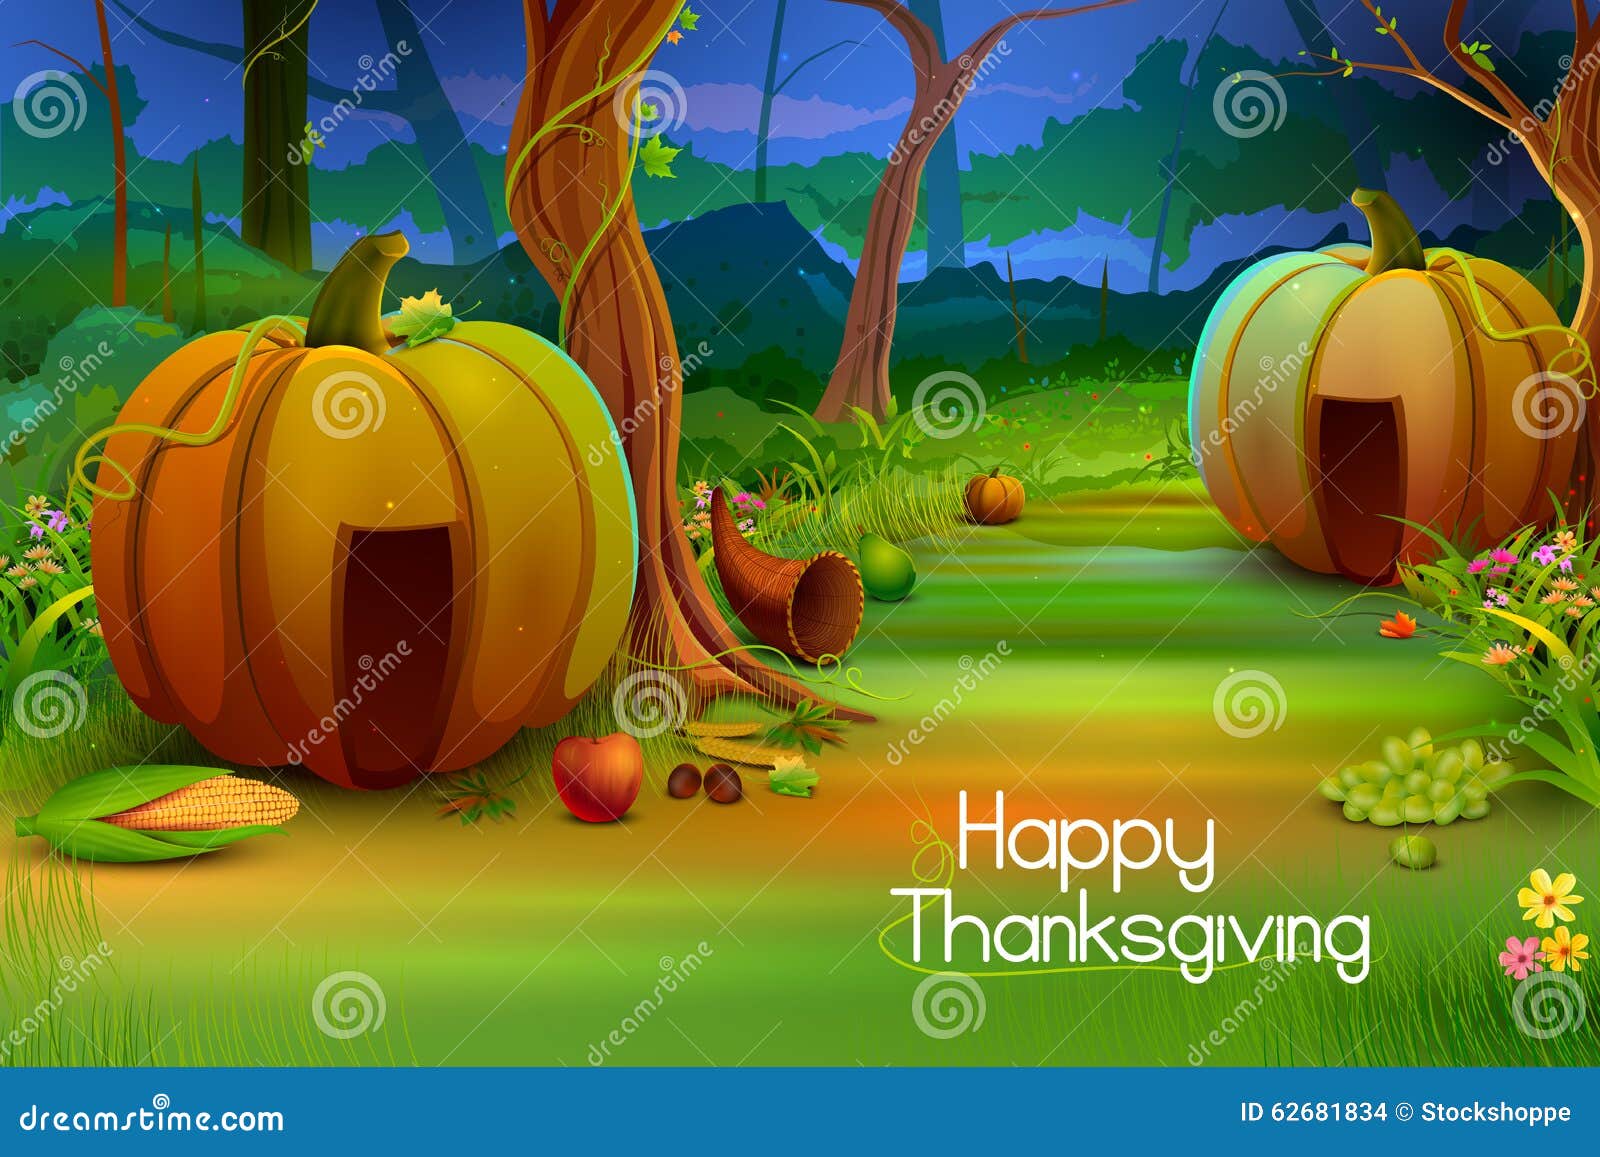 56,738 Happy Thanksgiving Stock Photos - Free & Royalty-Free Stock Photos  from Dreamstime